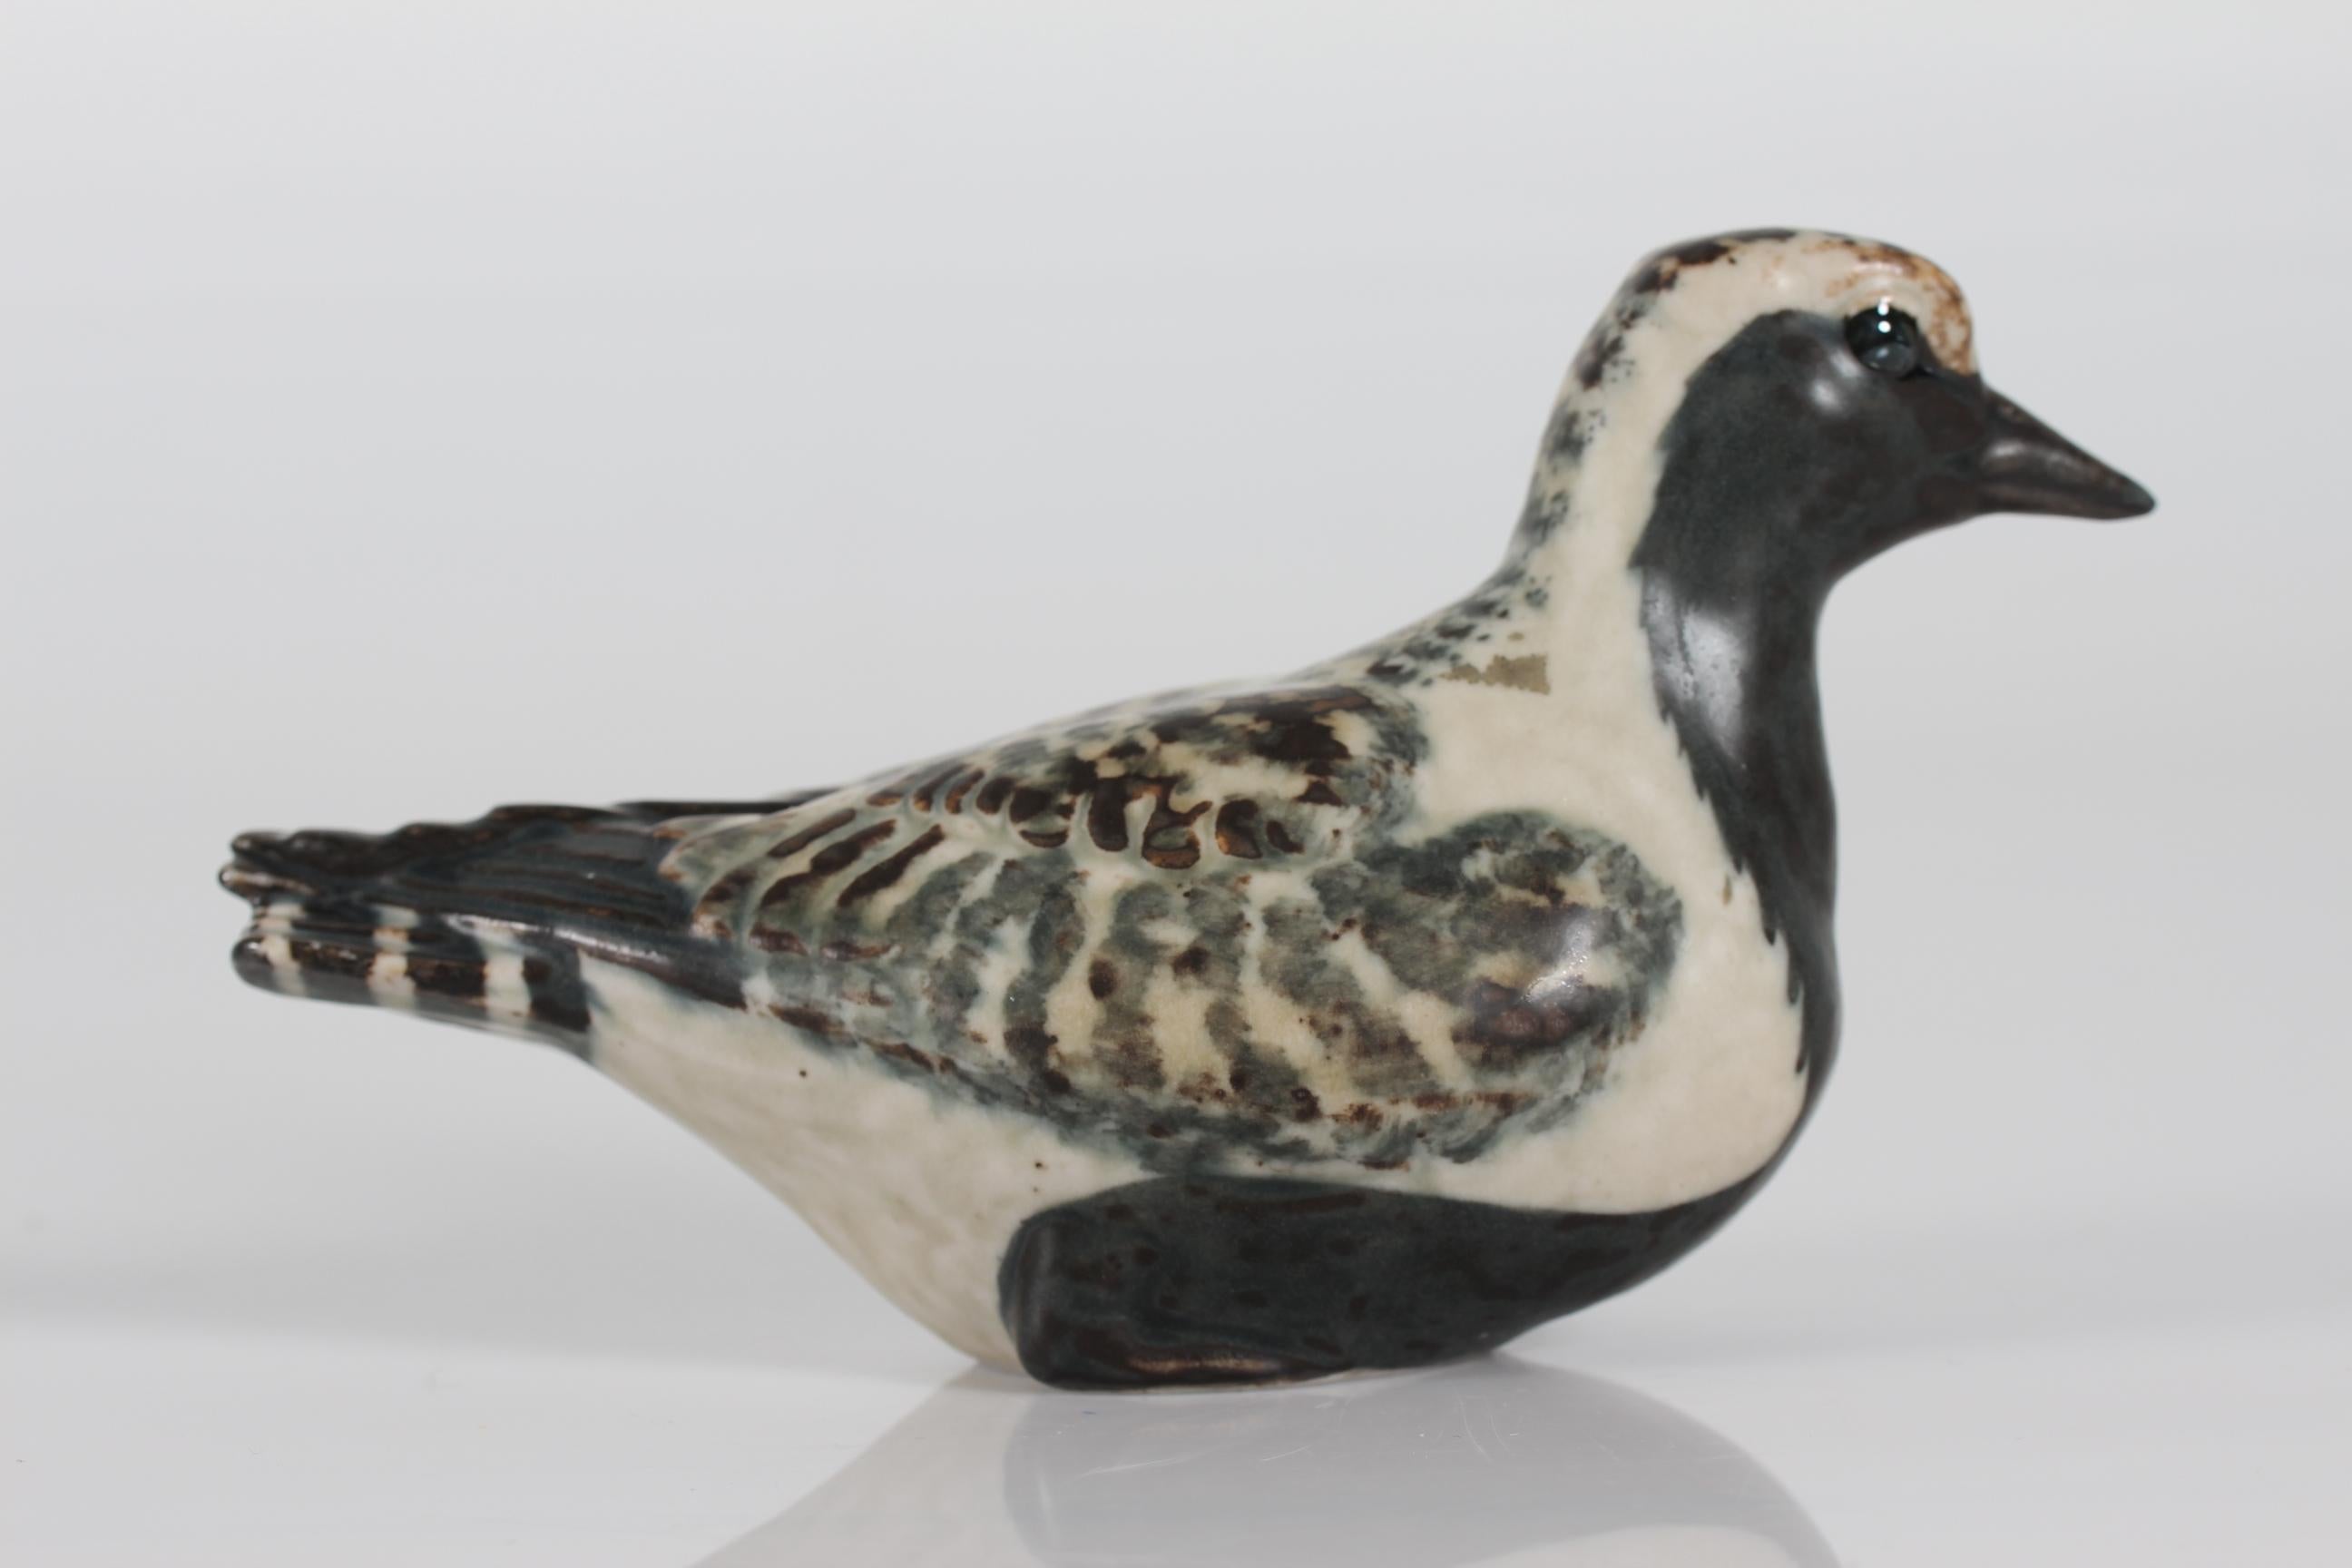 Stoneware figurine of the golden plover model no. 22486 designed by Jeanne Grut and manufactured by Royal Copenhagen
The bird is decorated with glaze in white, grey and black colors
Stamp mark from the 1970s

Measures: Height 10 cm
Length 18